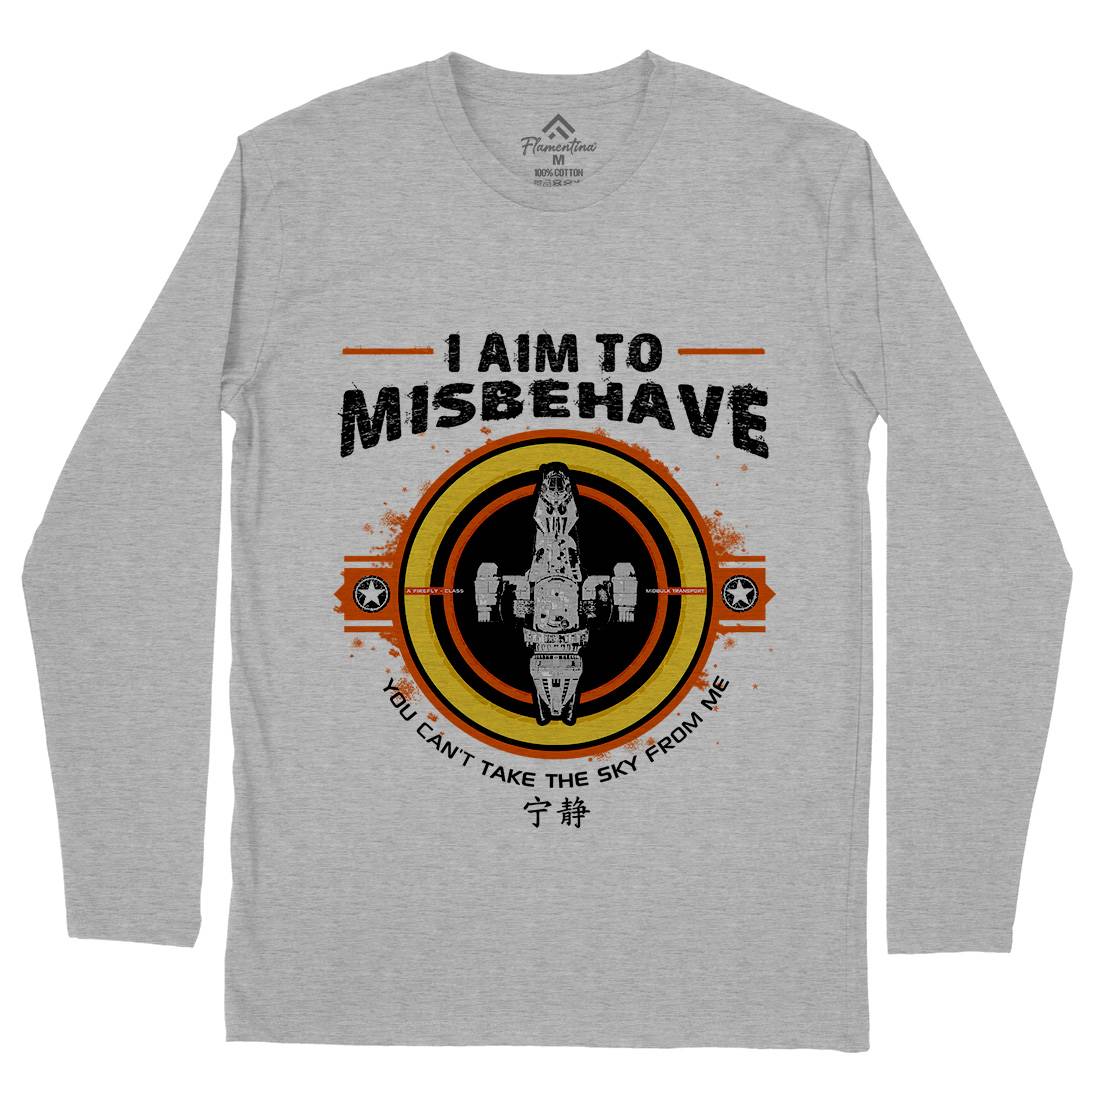 I Aim To Misbehave Mens Long Sleeve T-Shirt Space D352